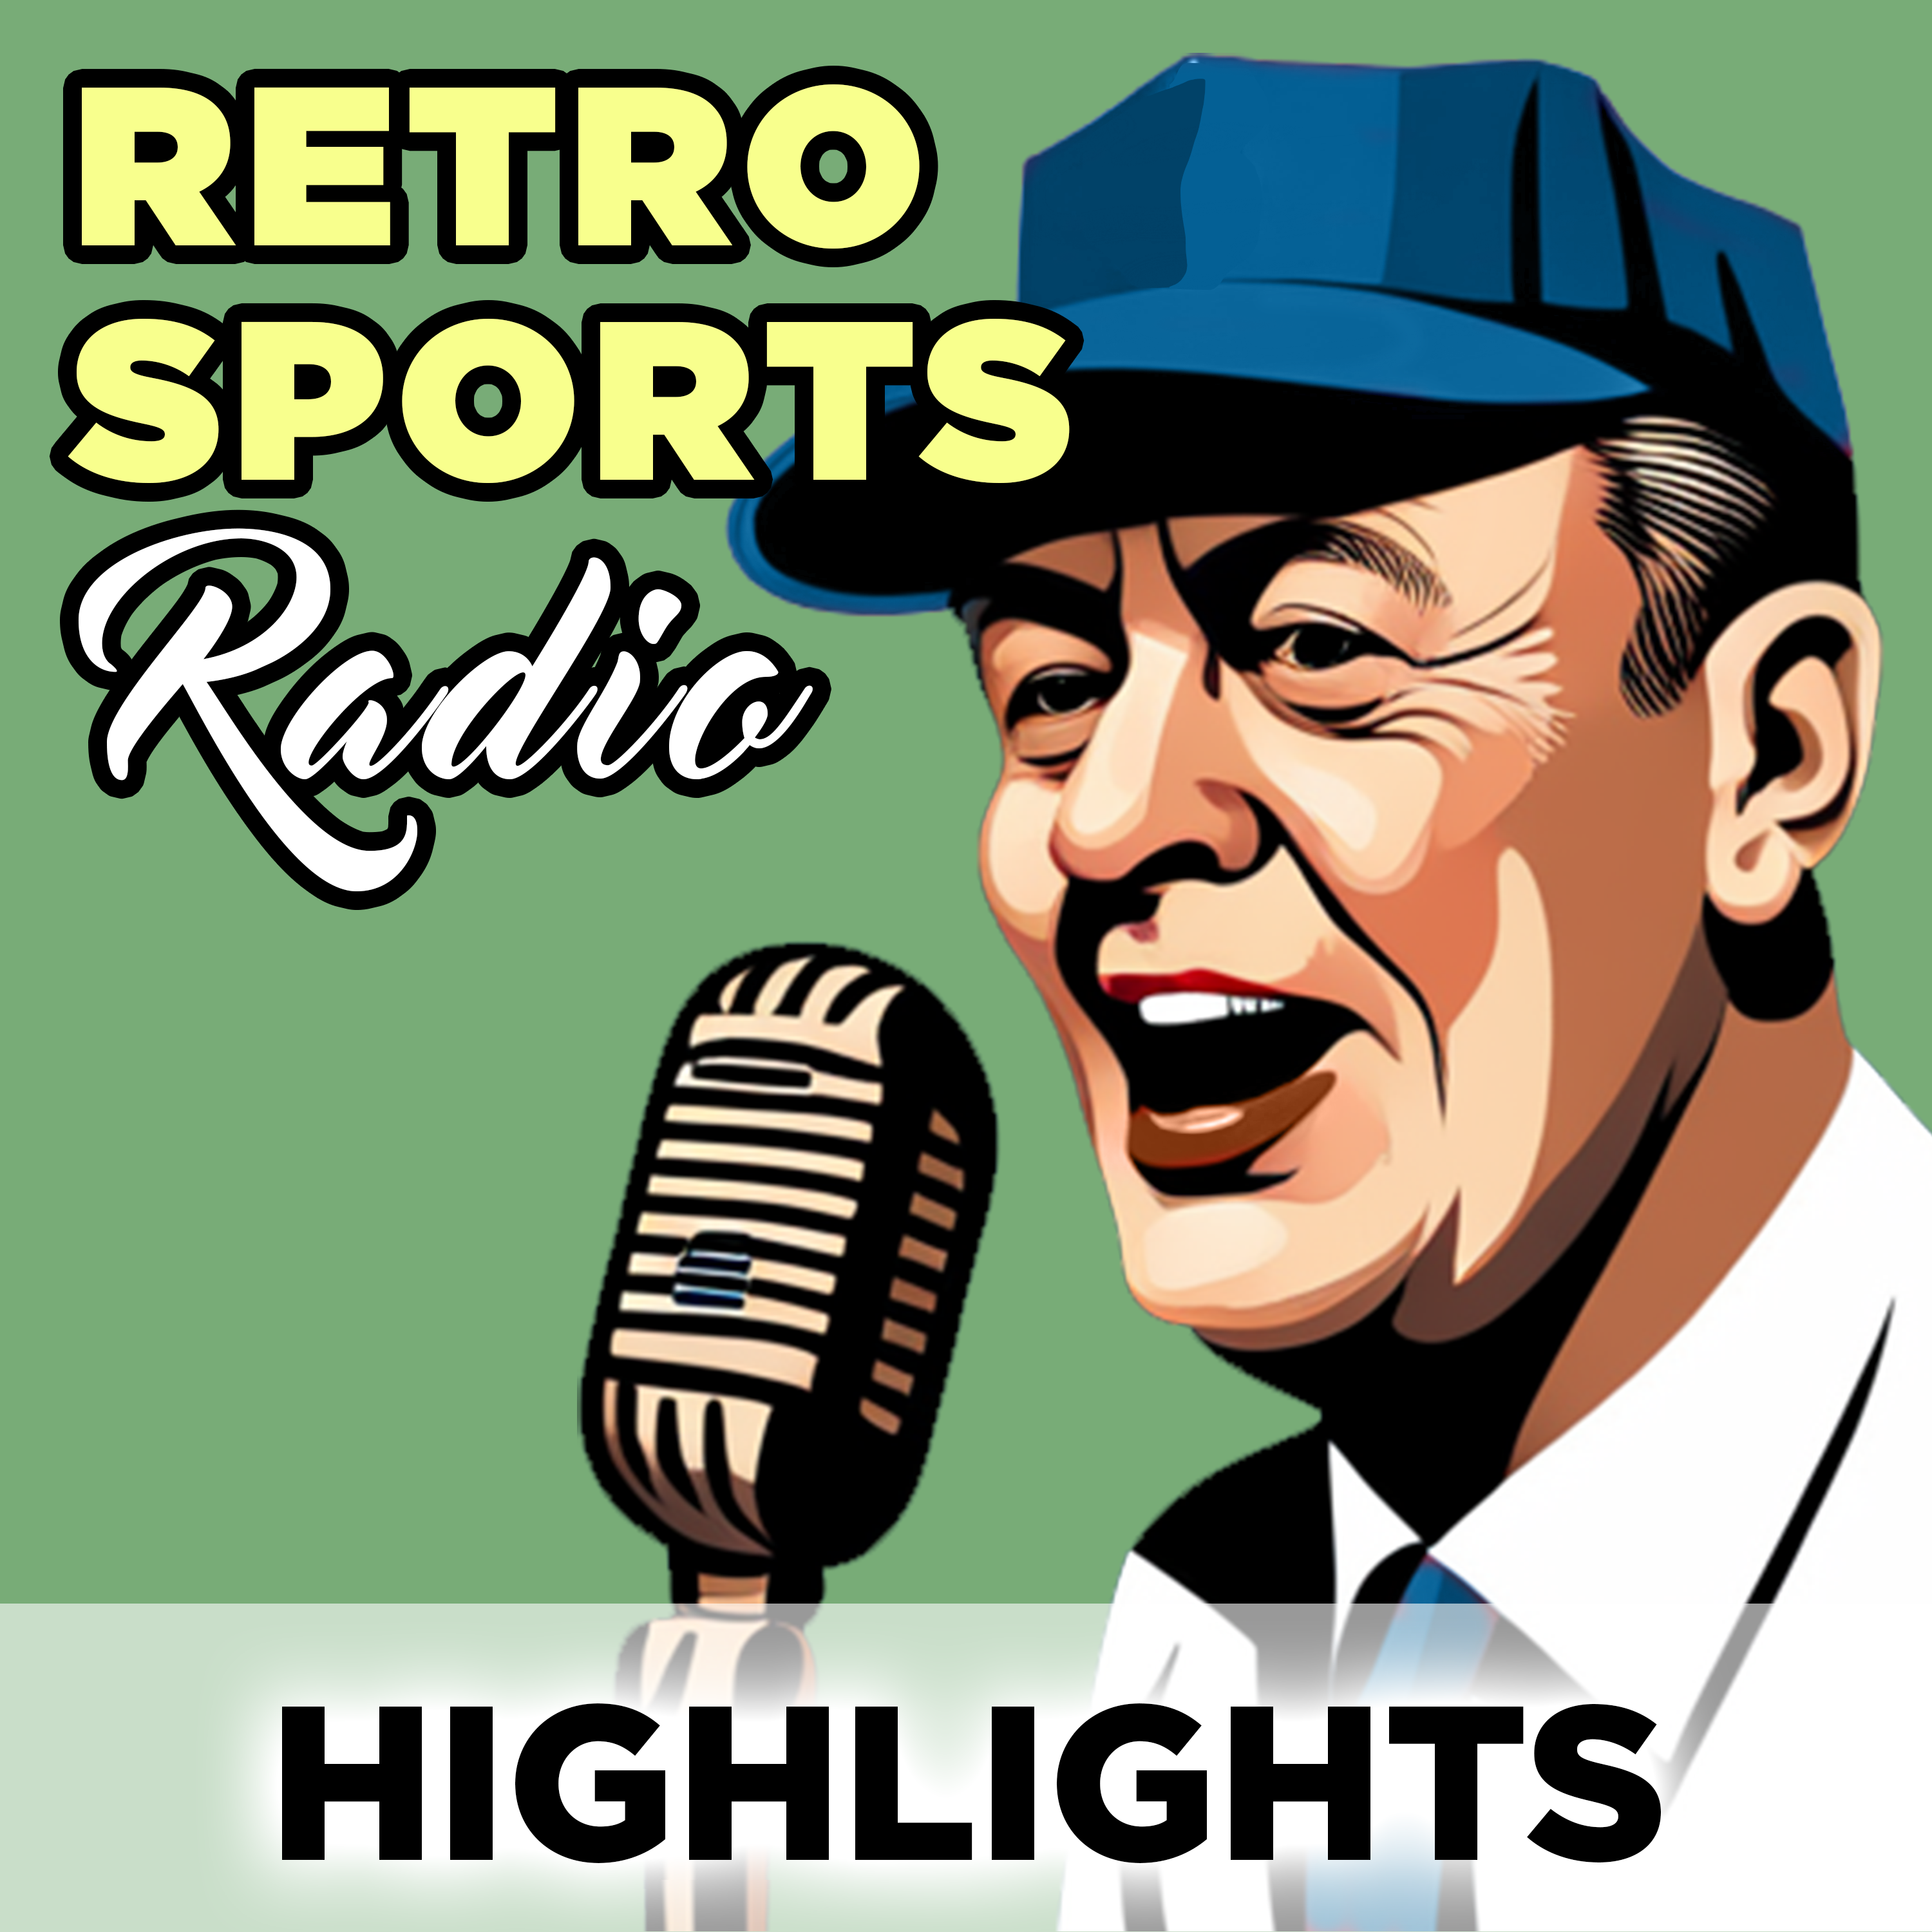 1955 • Baseball Clip • The Legend of Babe Ruth - Radio Biography